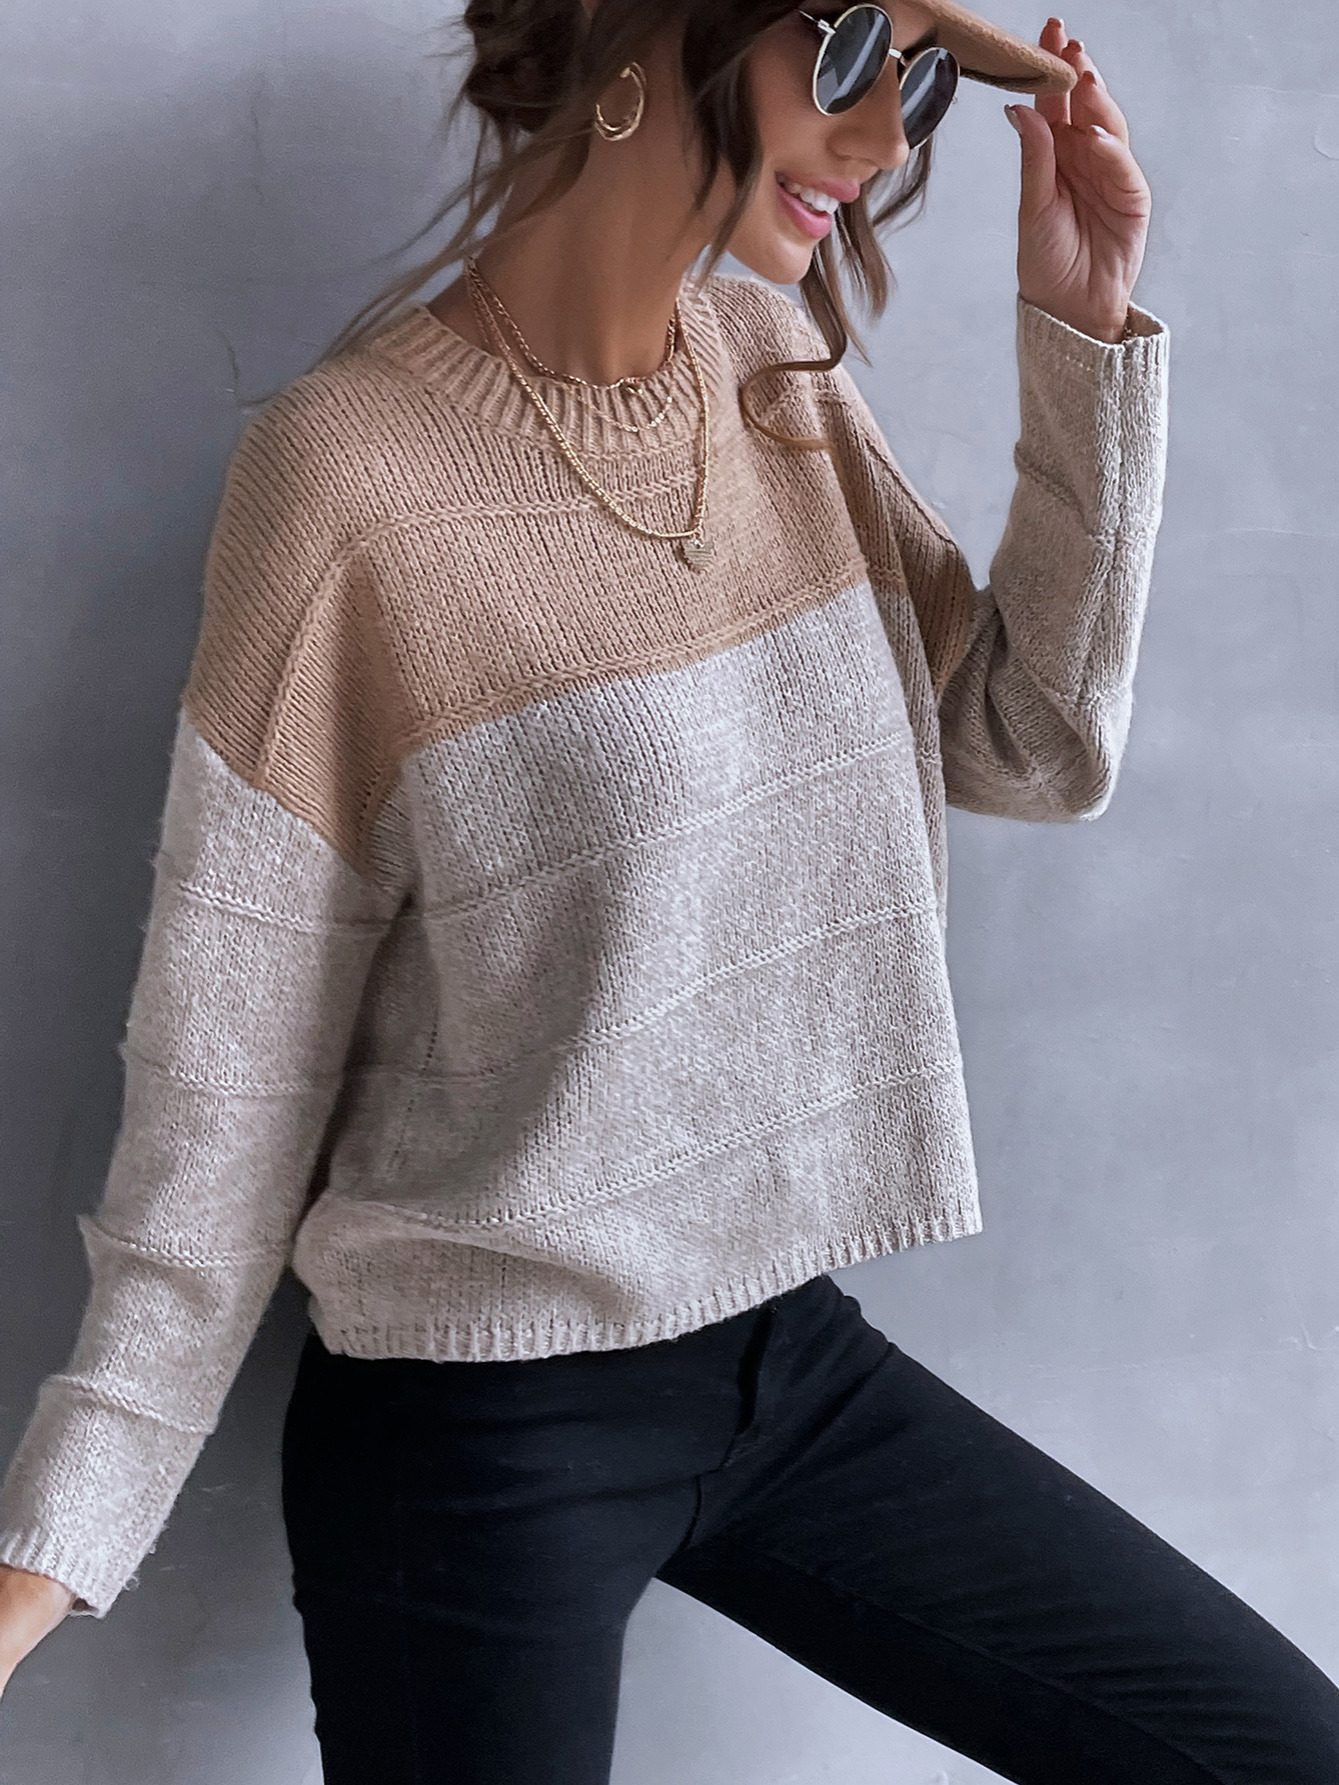 Two-Toned Color Block Sweater, Loose-Fit Rib-Knit Crew Neck Sweater, Casual  Tops For Fall & Winter, Women's Clothing